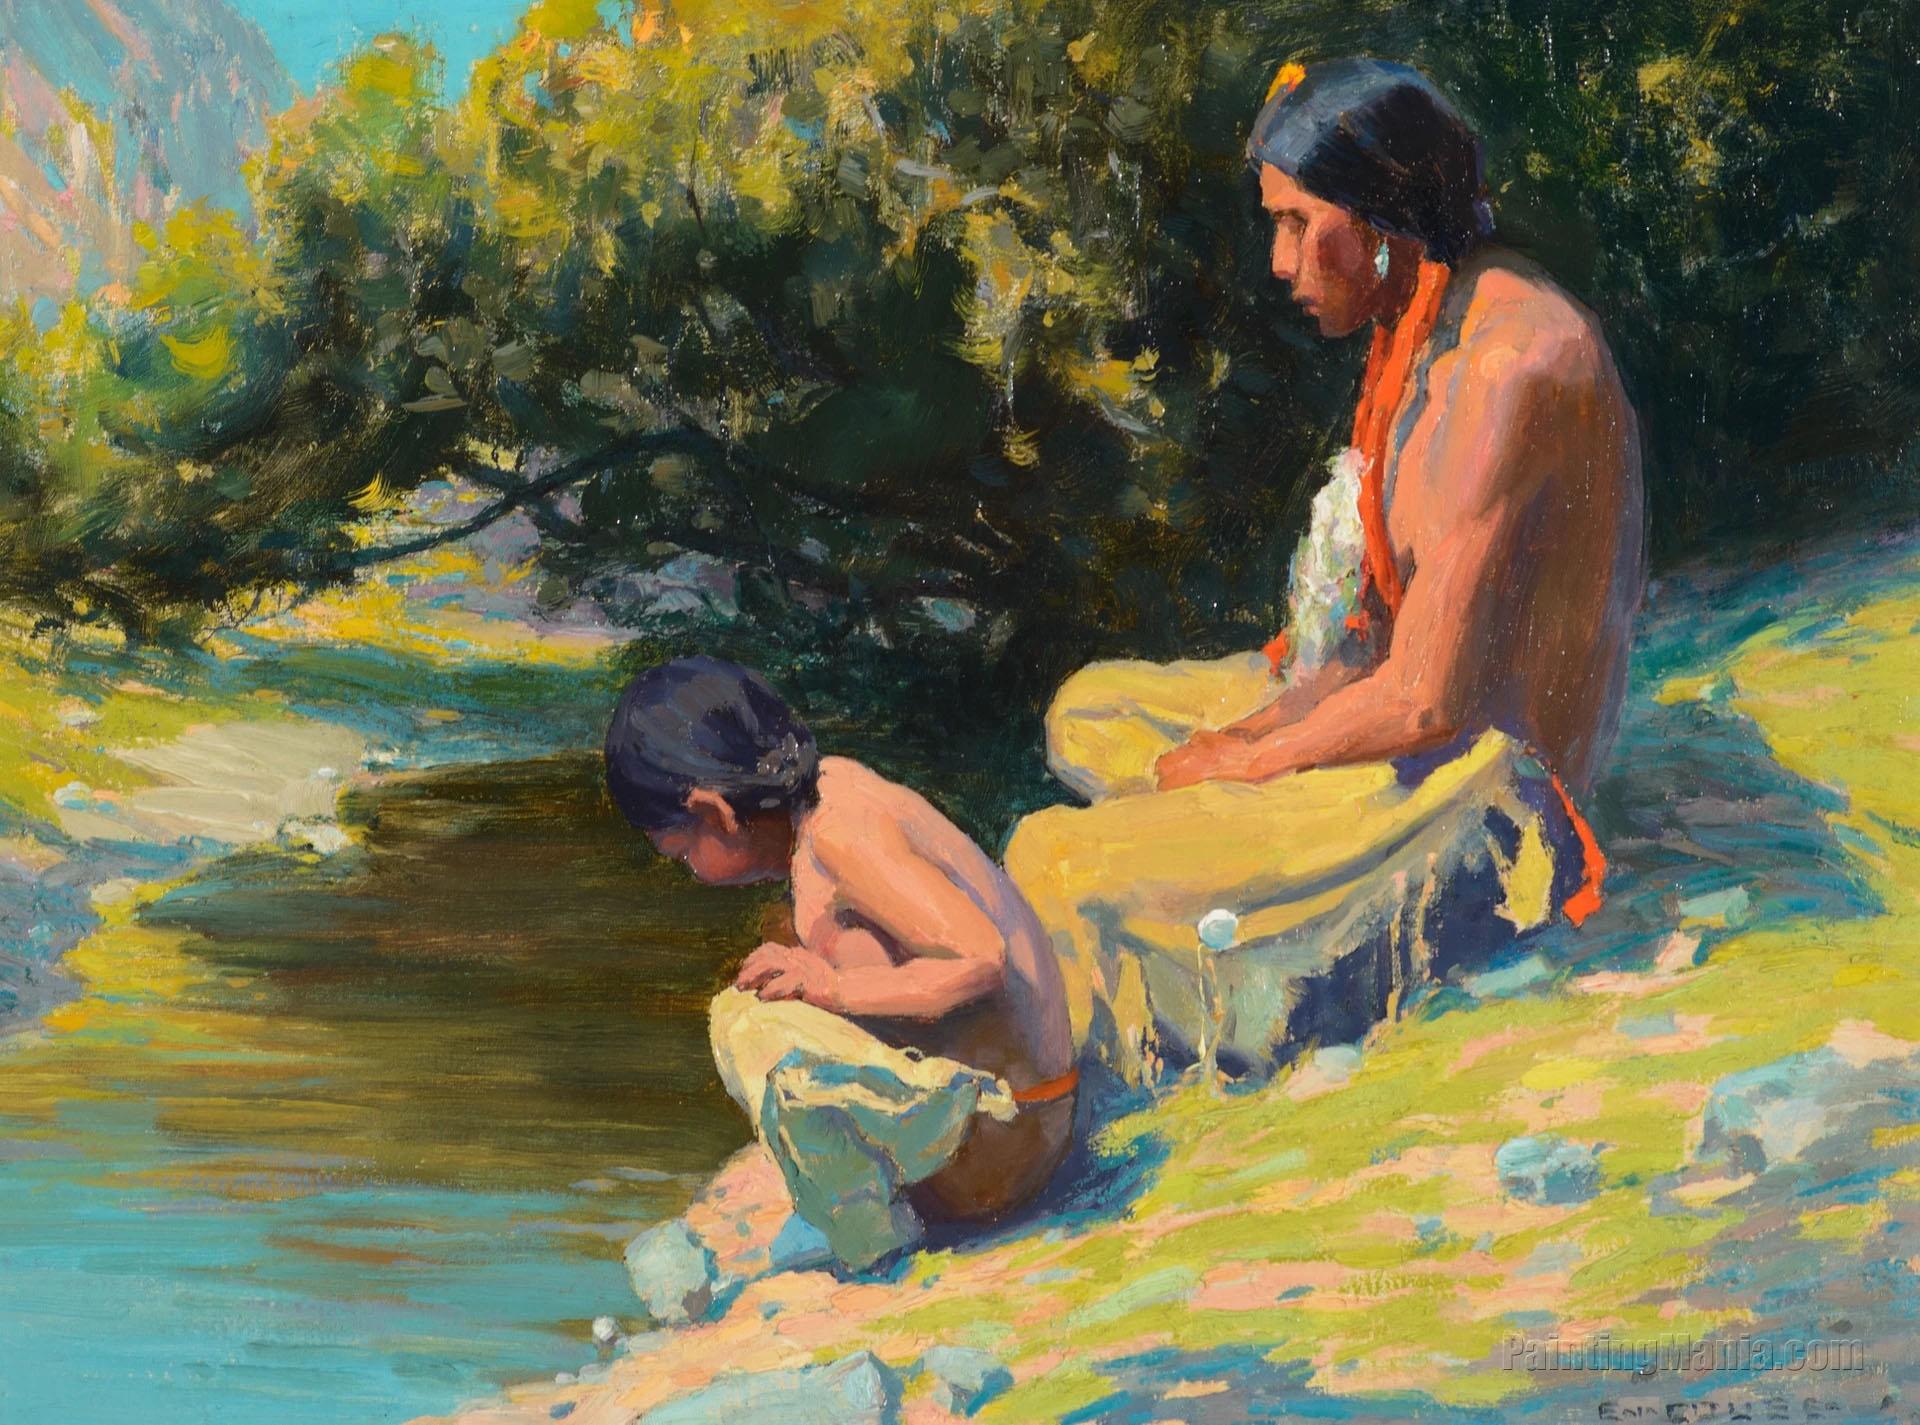 Bank of the River, Father and Son